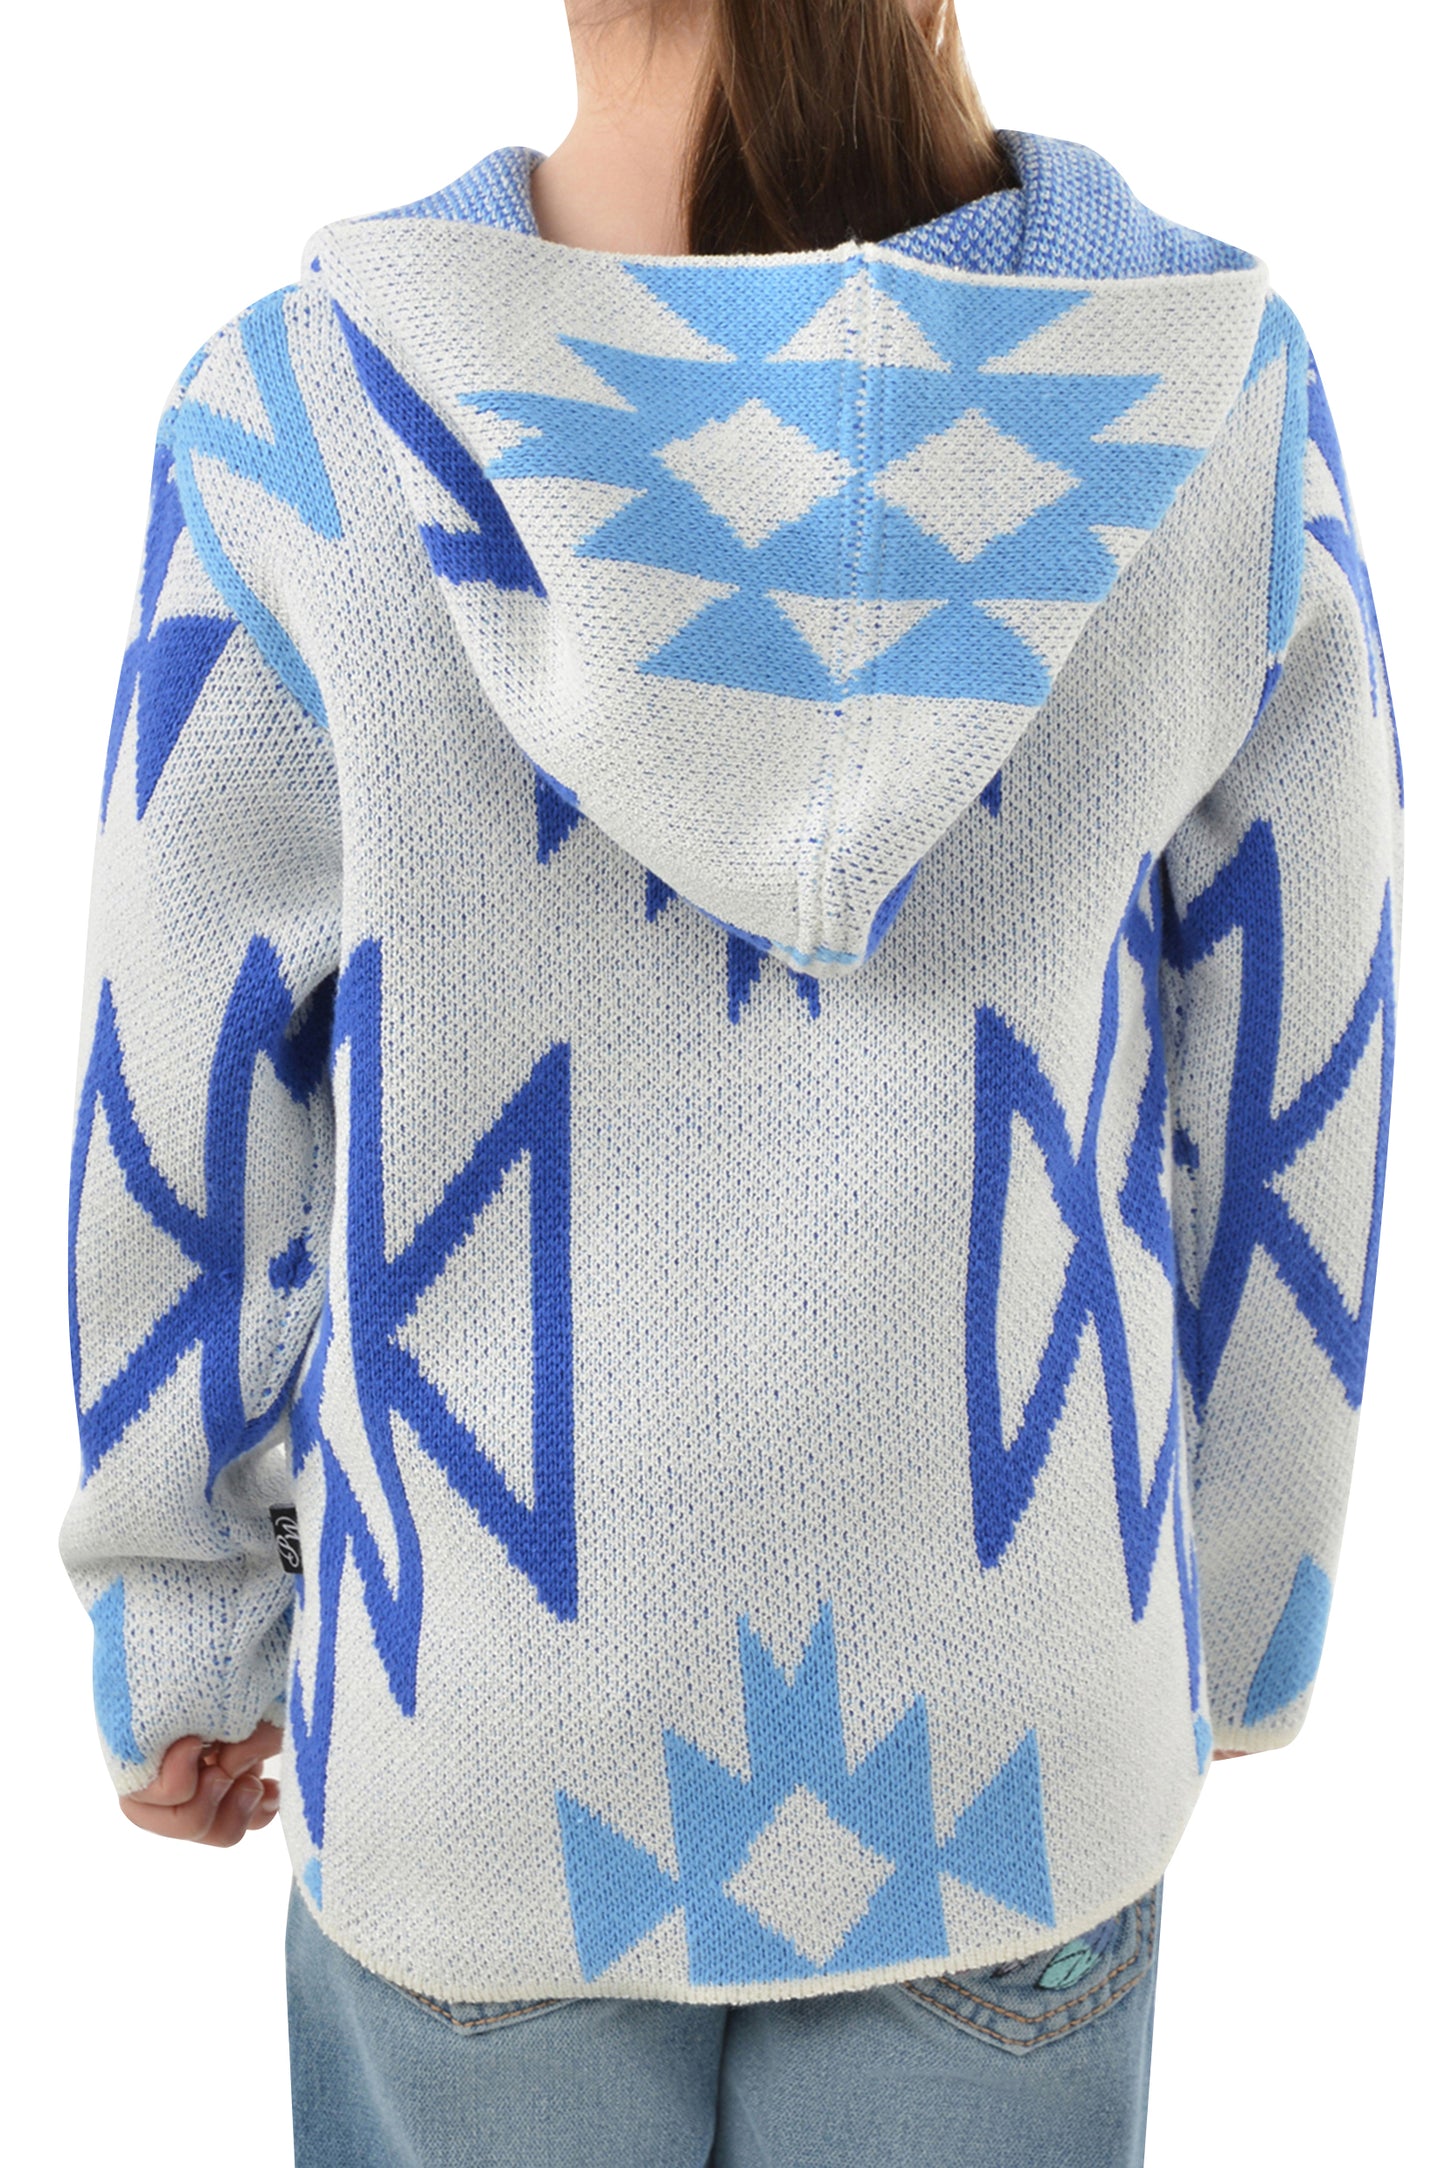 Pure Western Girls Khloe Knitted Pullover - Cream/Blue - P3W5532722- On Sale